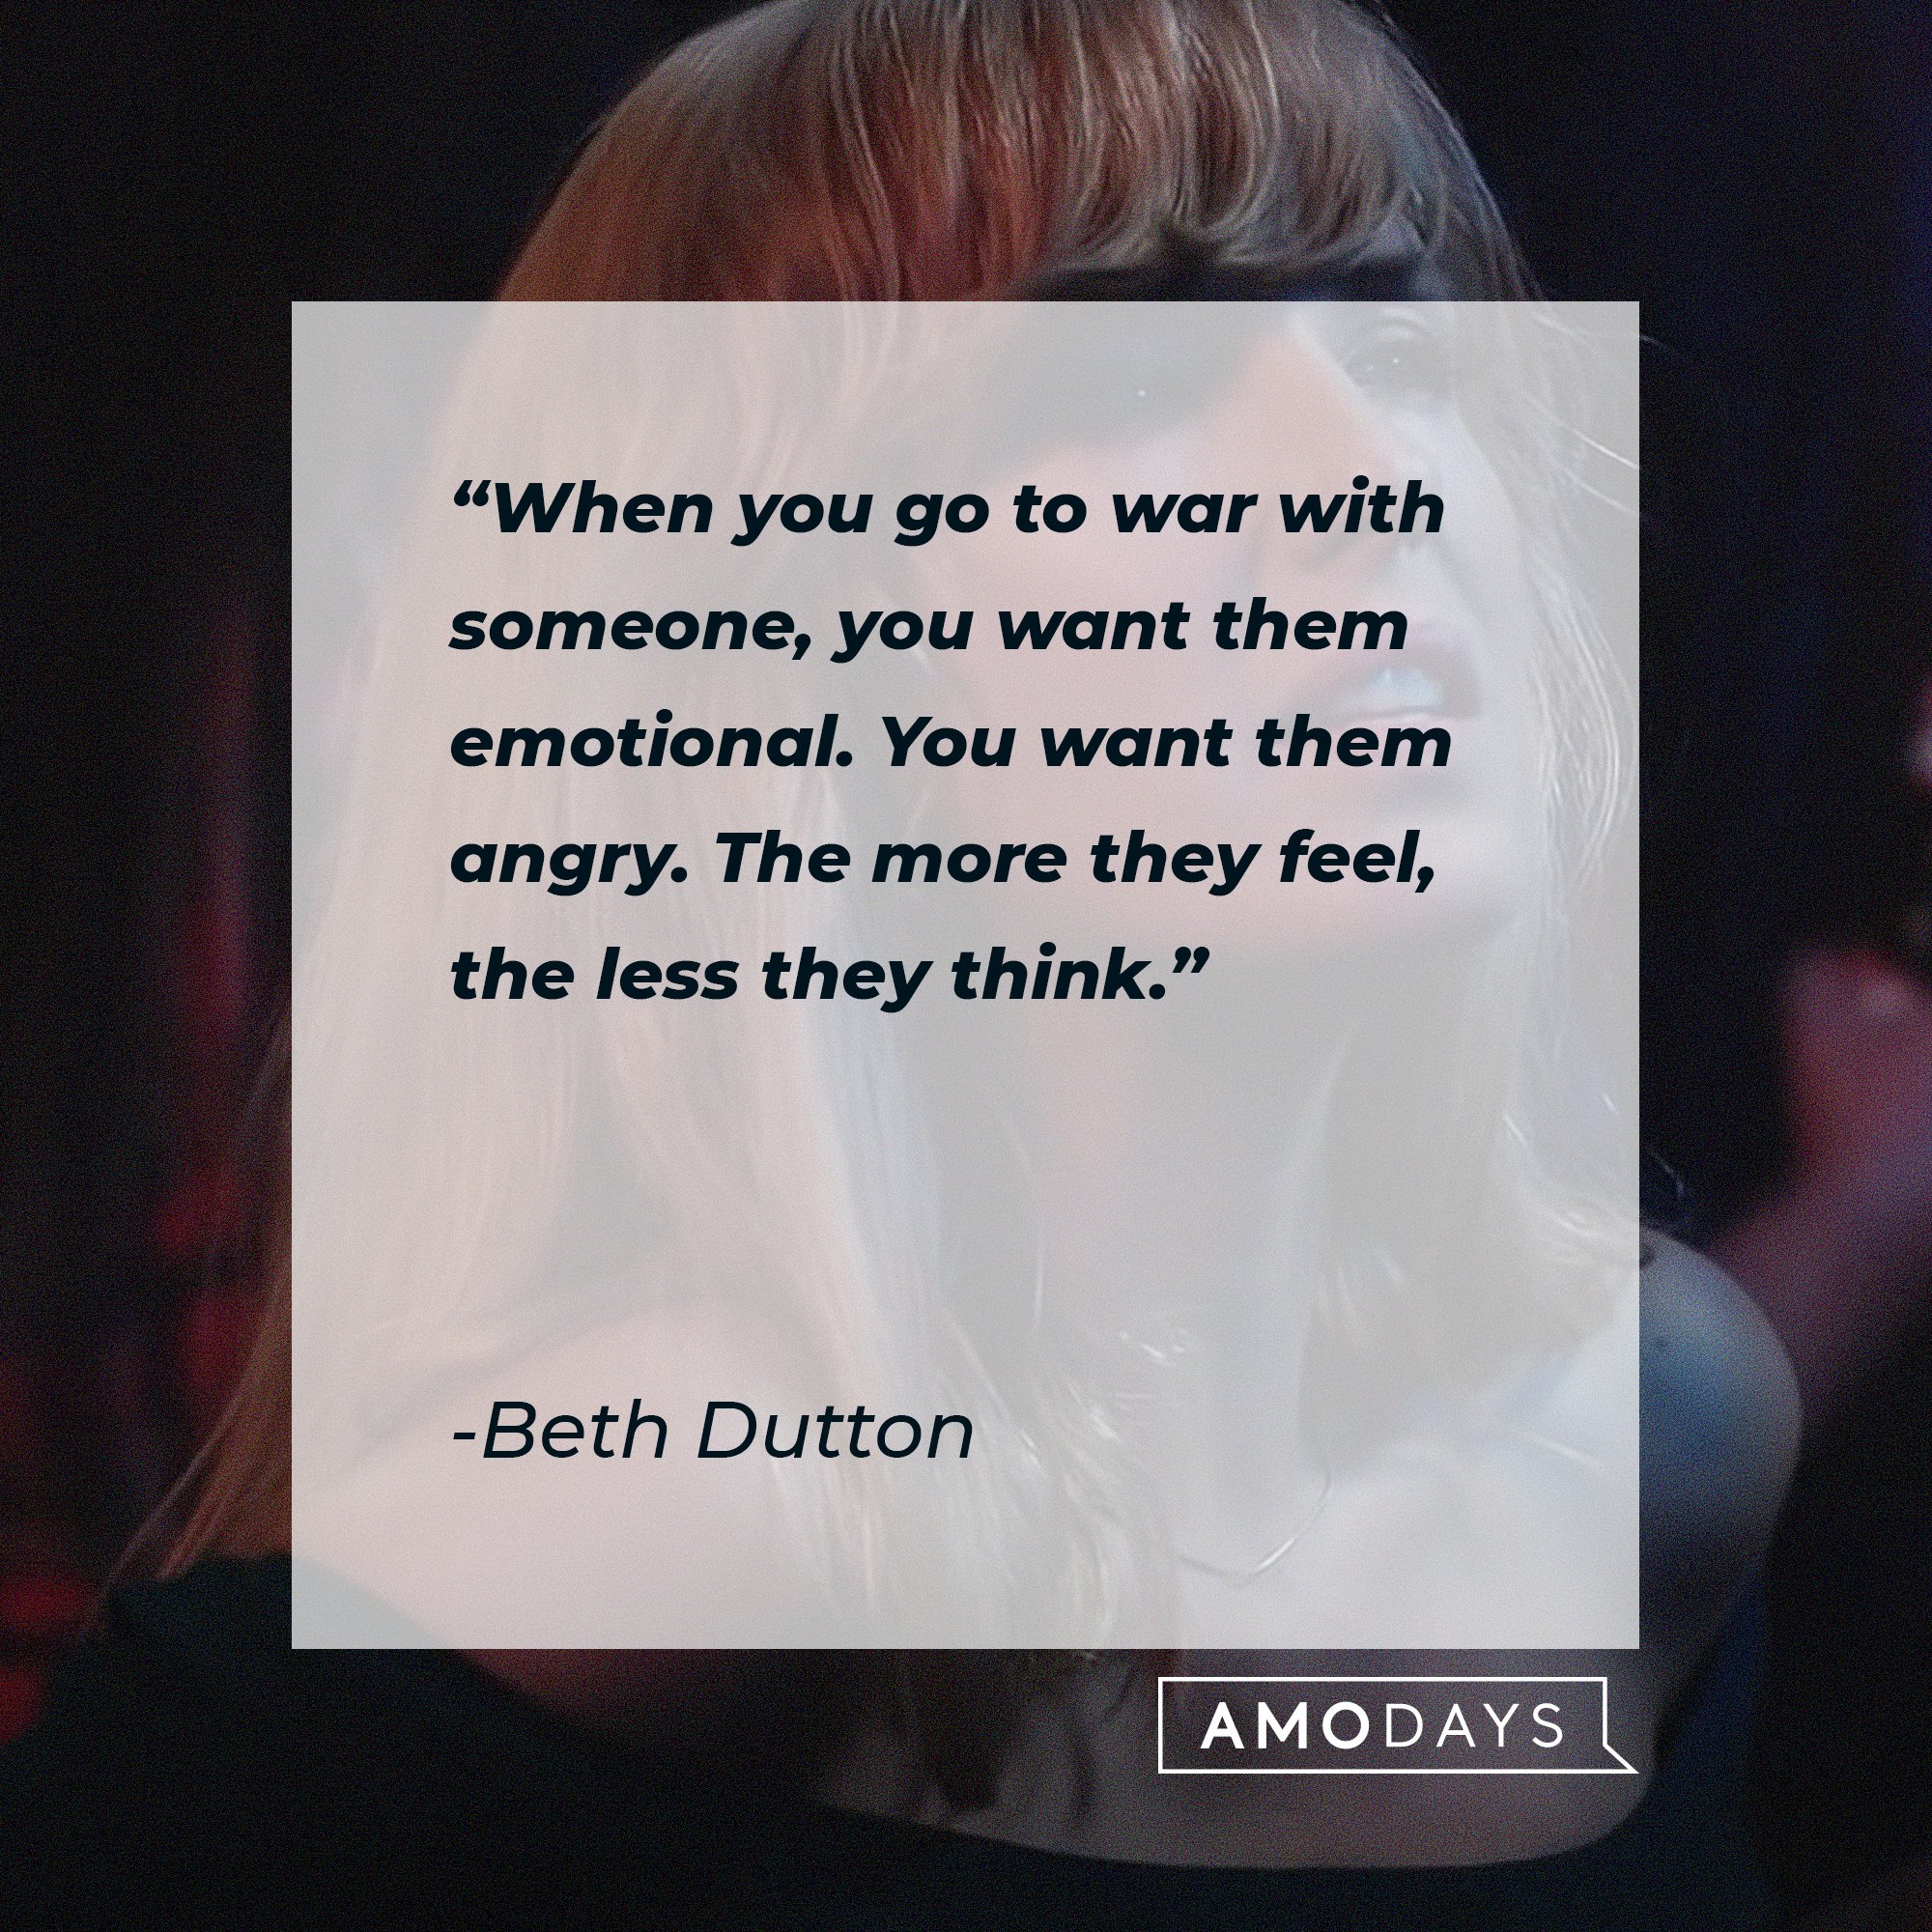  Beth Dutton's quote: "When you go to war with someone, you want them emotional. You want them angry. The more they feel, the less they think."  | Source: AmoDays